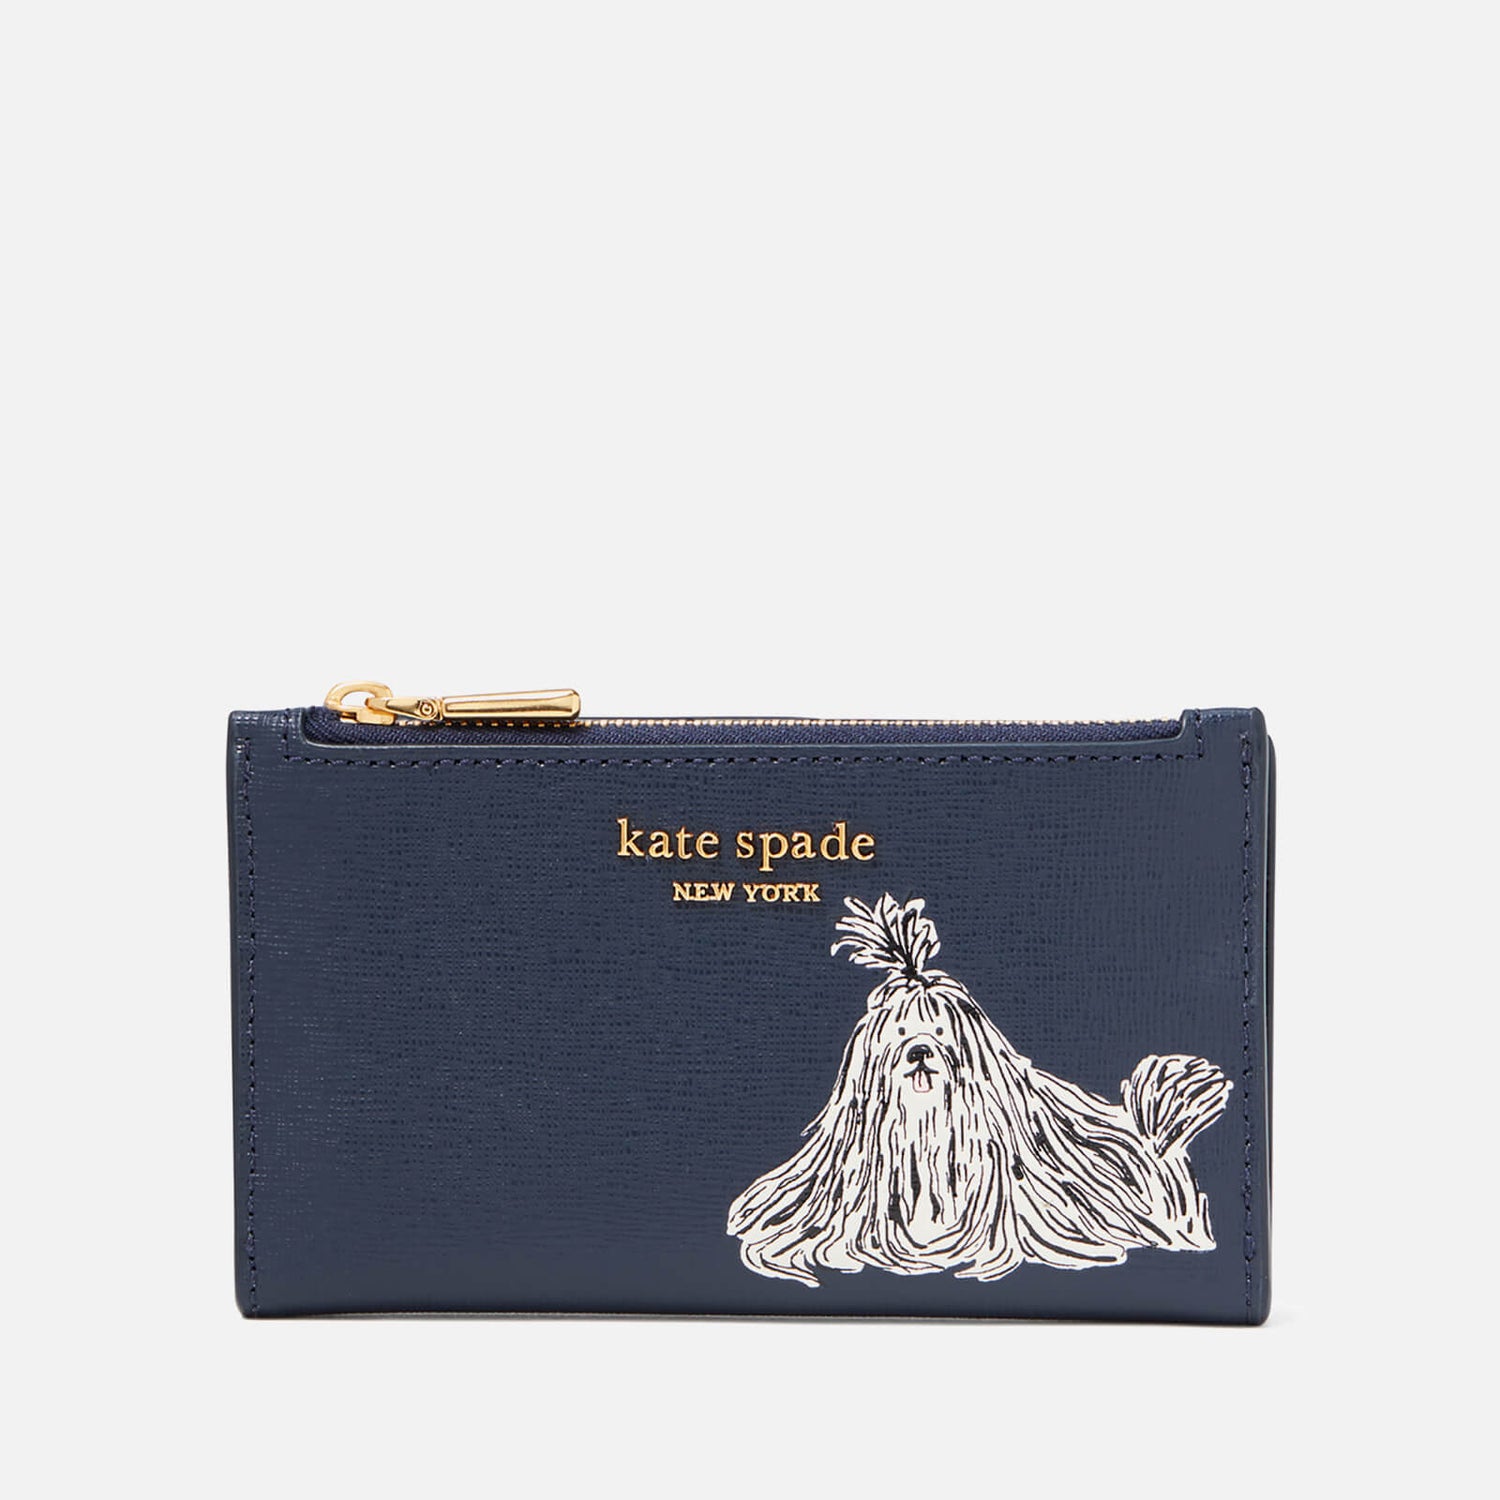 Kate Spade New York Shaggy Saffiano Leather Wallet